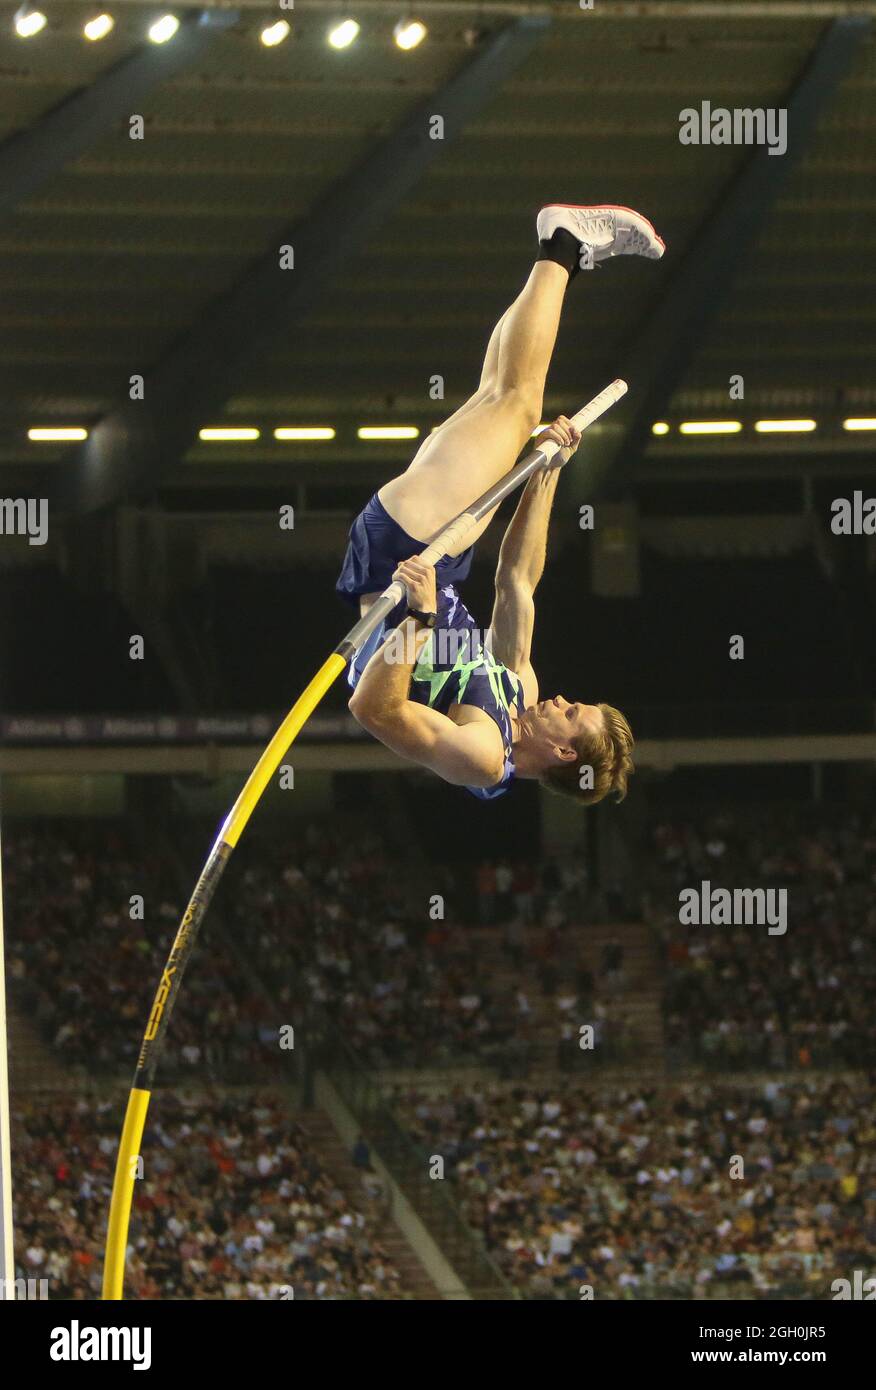 Brussels, Belgium. 03rd Sep, 2021. Christopher Nielsen of USA Pole Vault Men during the IAAF Wanda Diamond League Brussels 2021, Memorial Van Damme meeting event on September 3, 2021 at King Baudouin stadium in Brussels, Belgium Credit: Independent Photo Agency/Alamy Live News Stock Photo